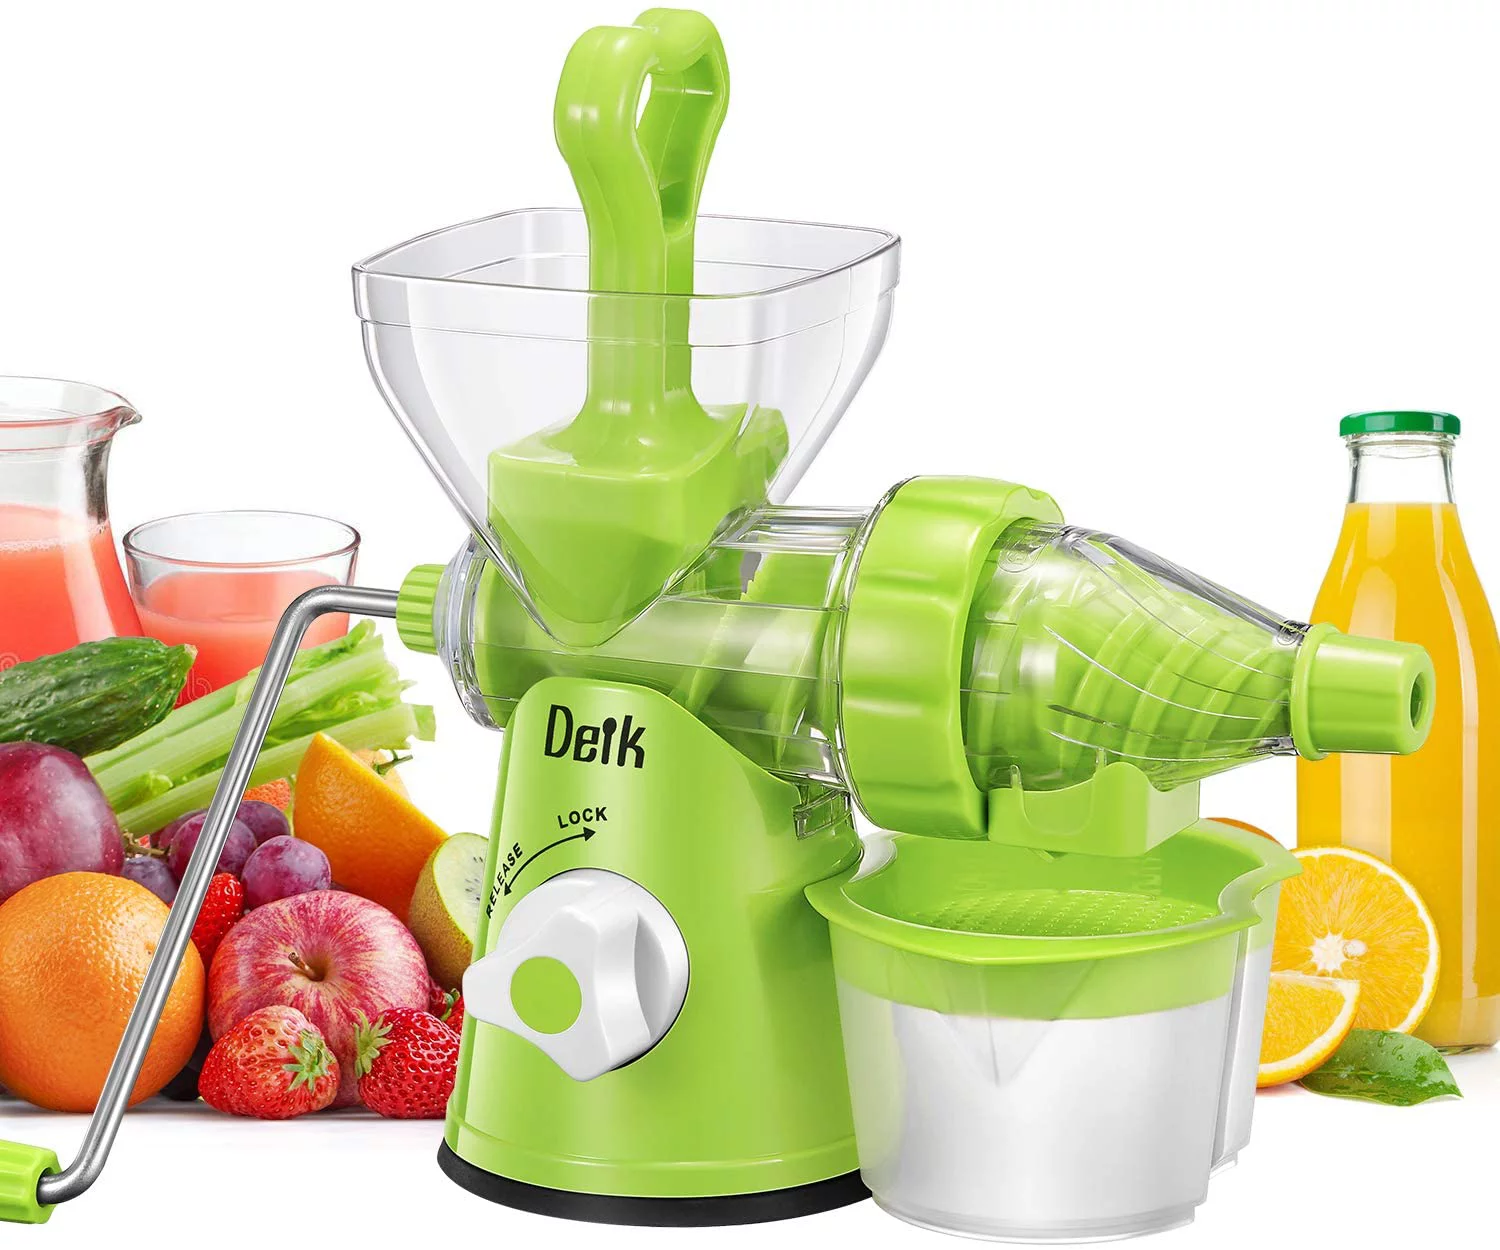 Where To Buy A Juicer